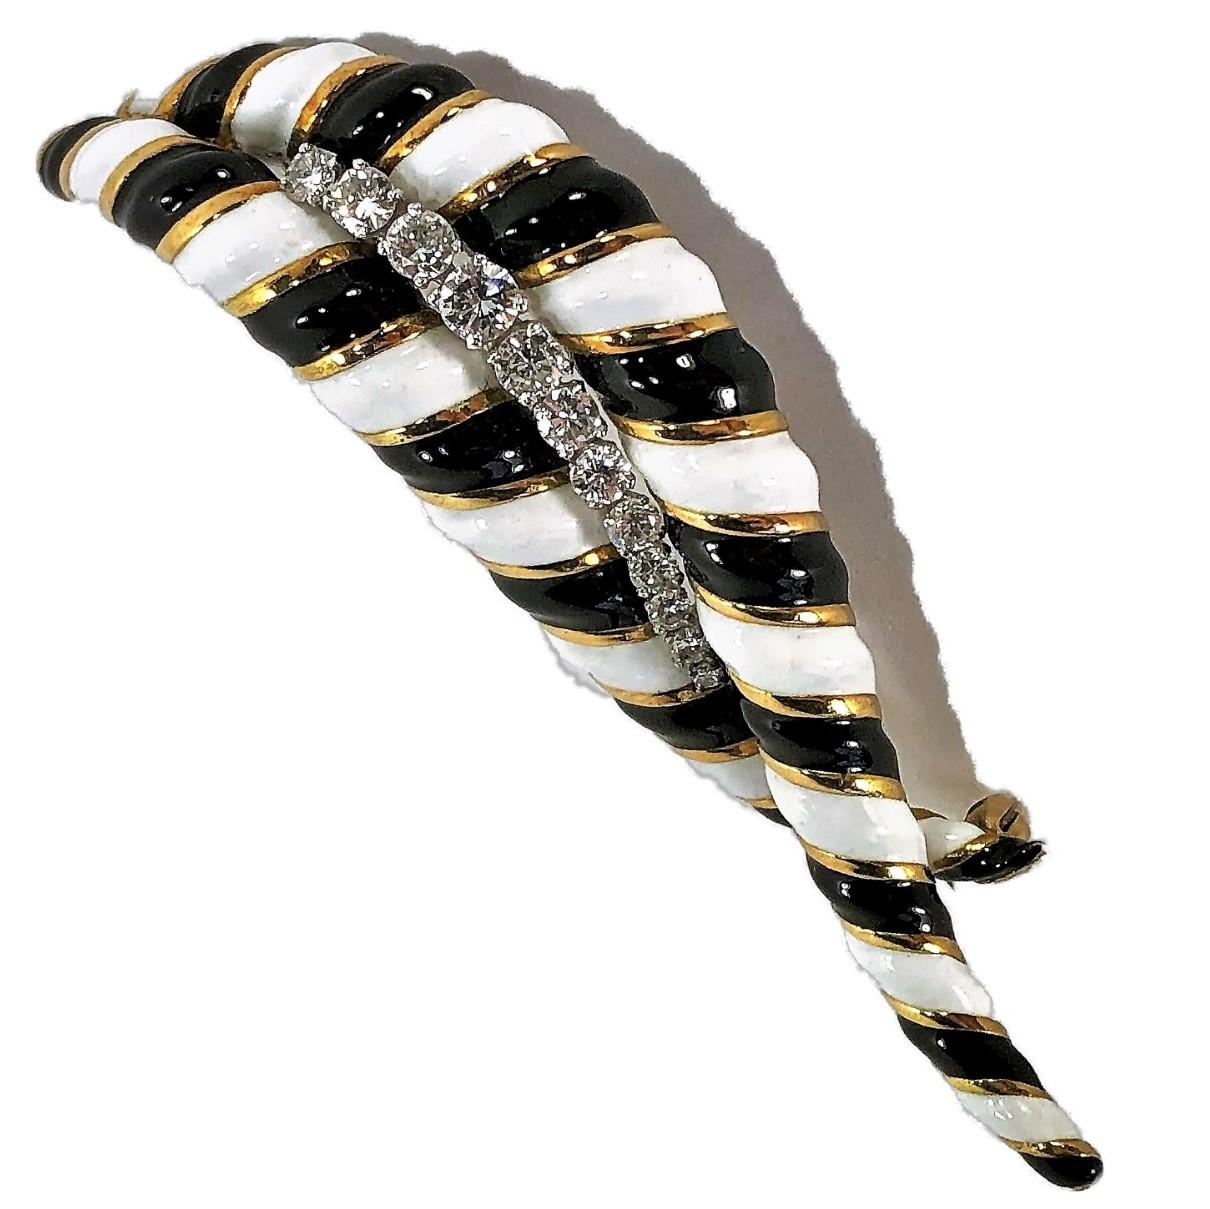 This large and graceful 18K Yellow Gold brooch measures 3 inches long
by 1 inch wide, and features alternating black and white enamel stripes 
delineated by yellow gold accents.
Set in the center are twelve brilliant cut diamonds with a total weight